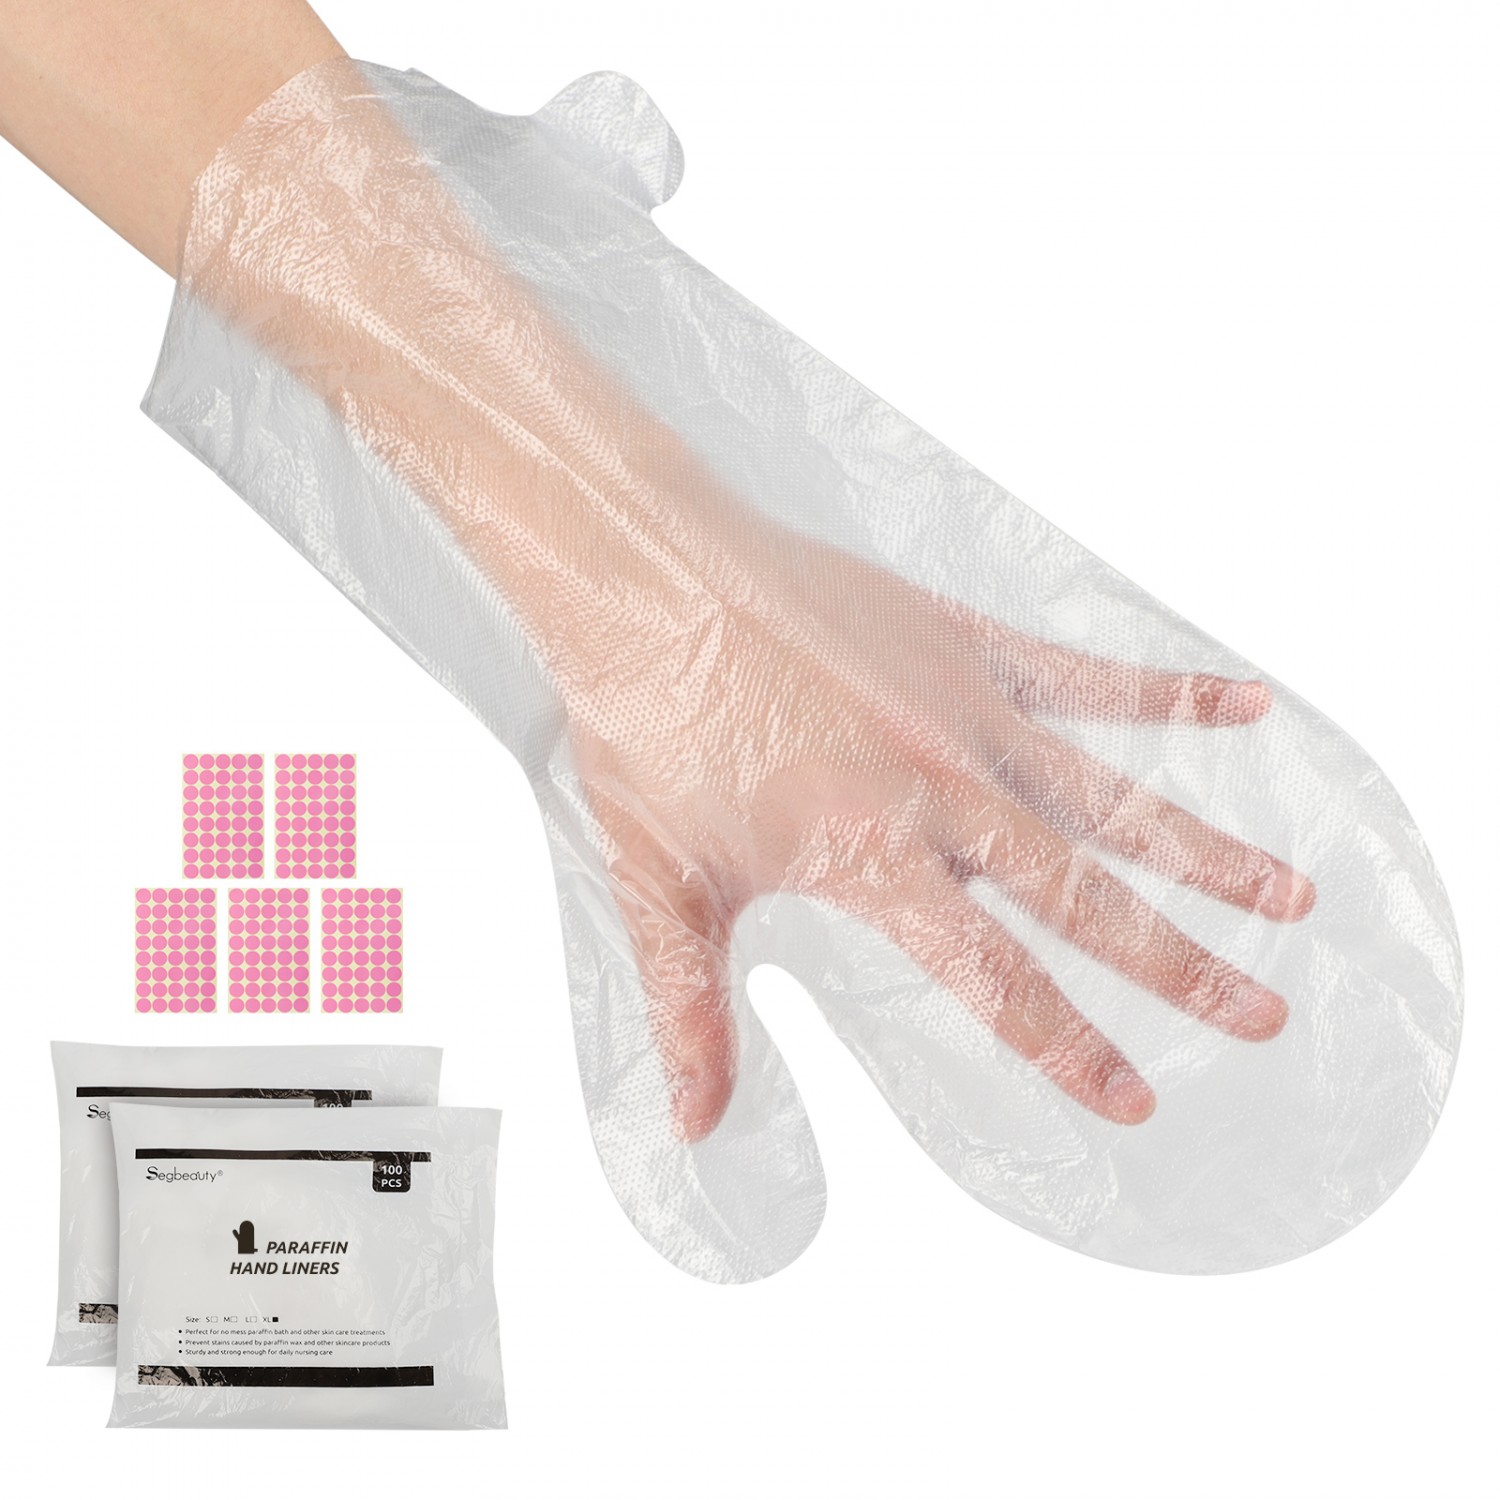 200 Counts Hands Paraffin Wax Liners